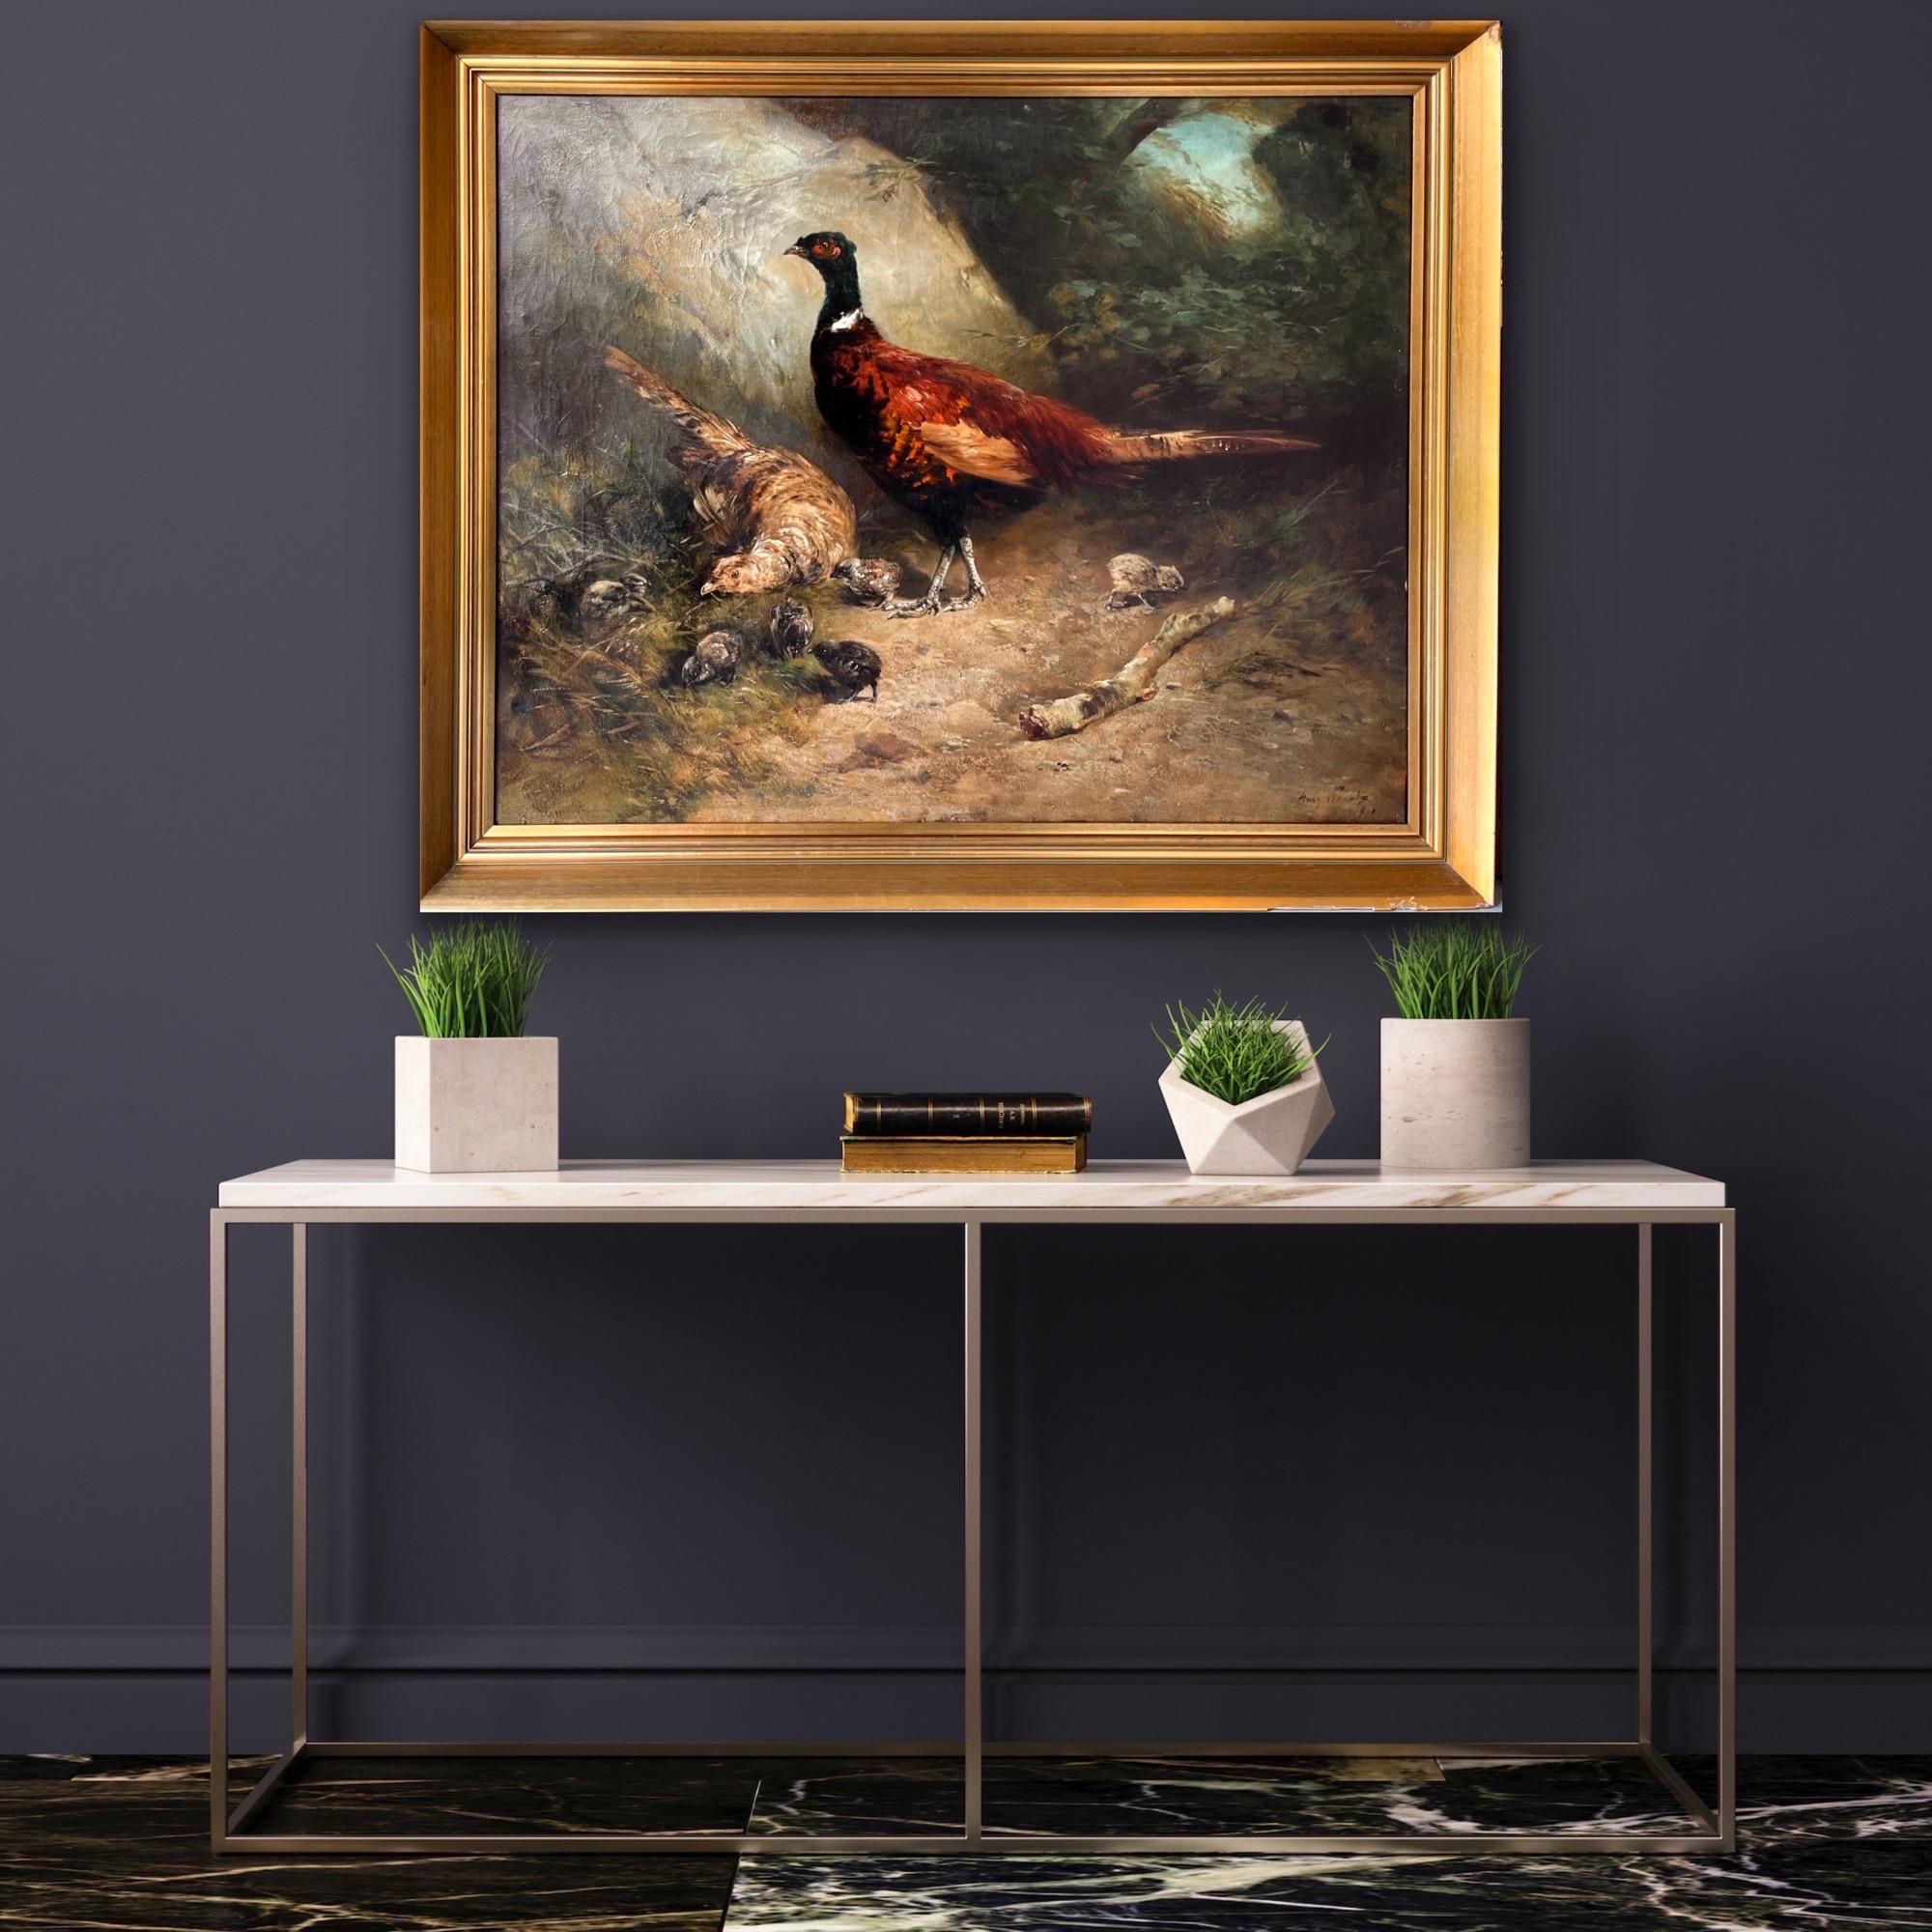 Huge 19th century romantic painting Pheasant with their chicks in a forest 5